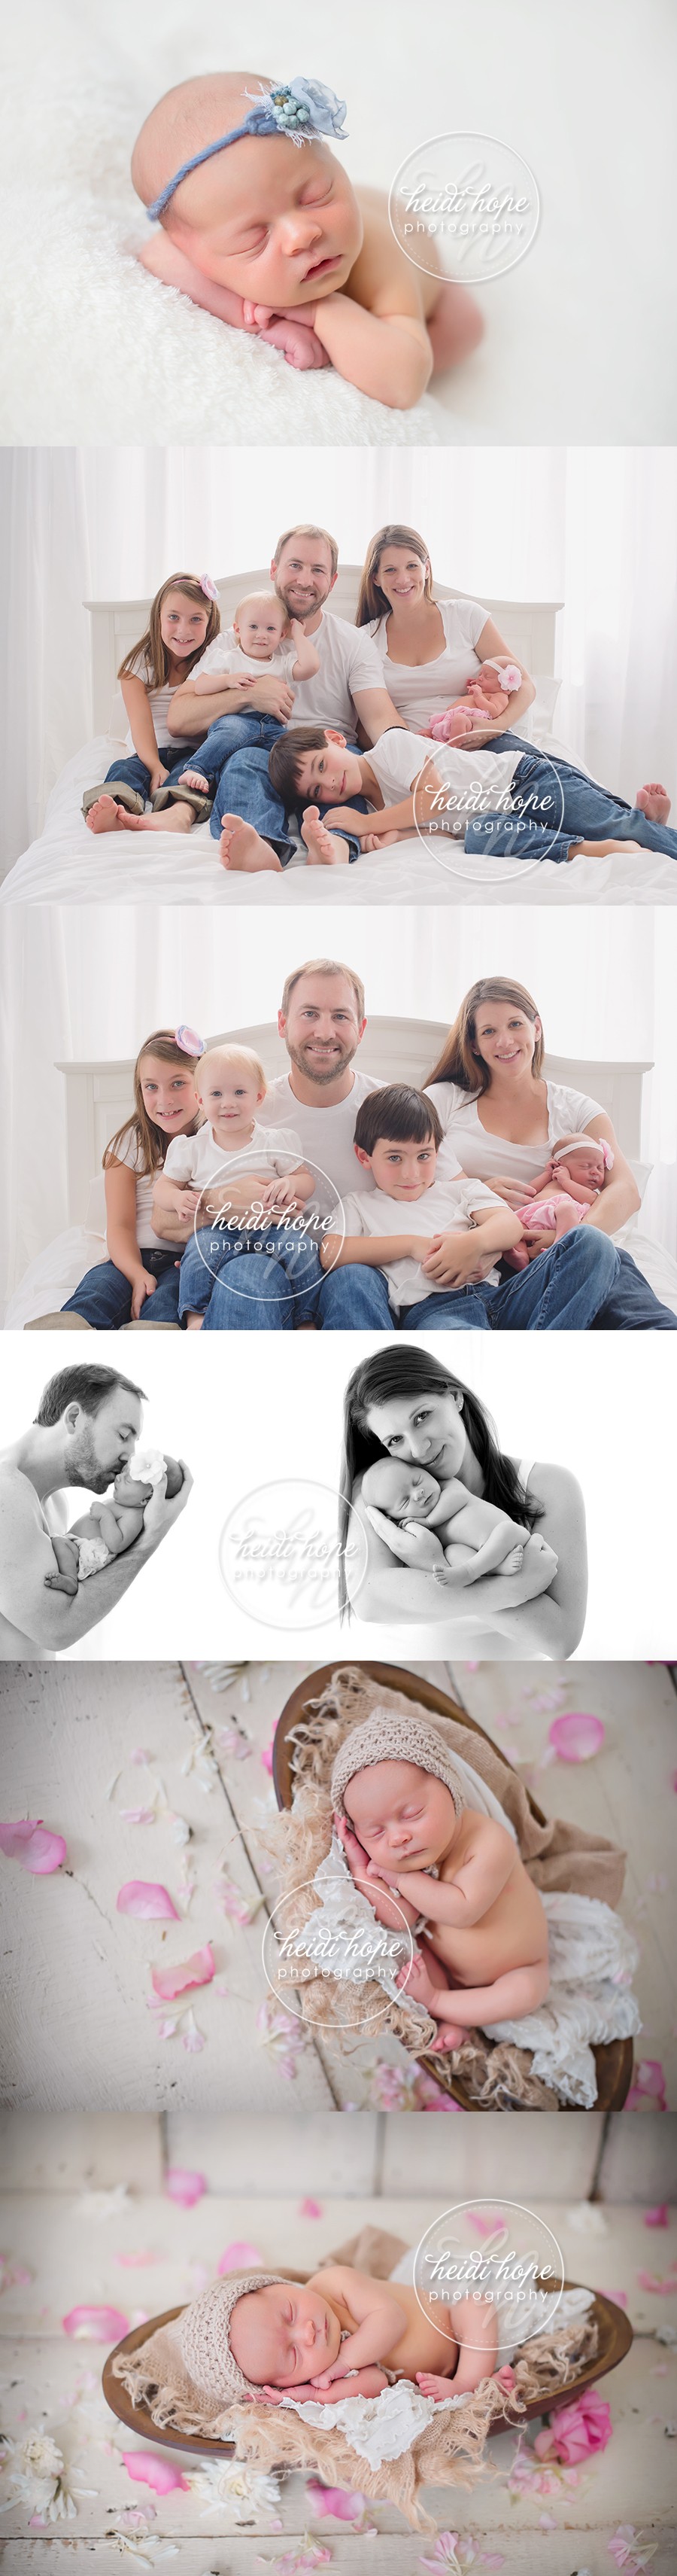 family of six newborn photos with siblings